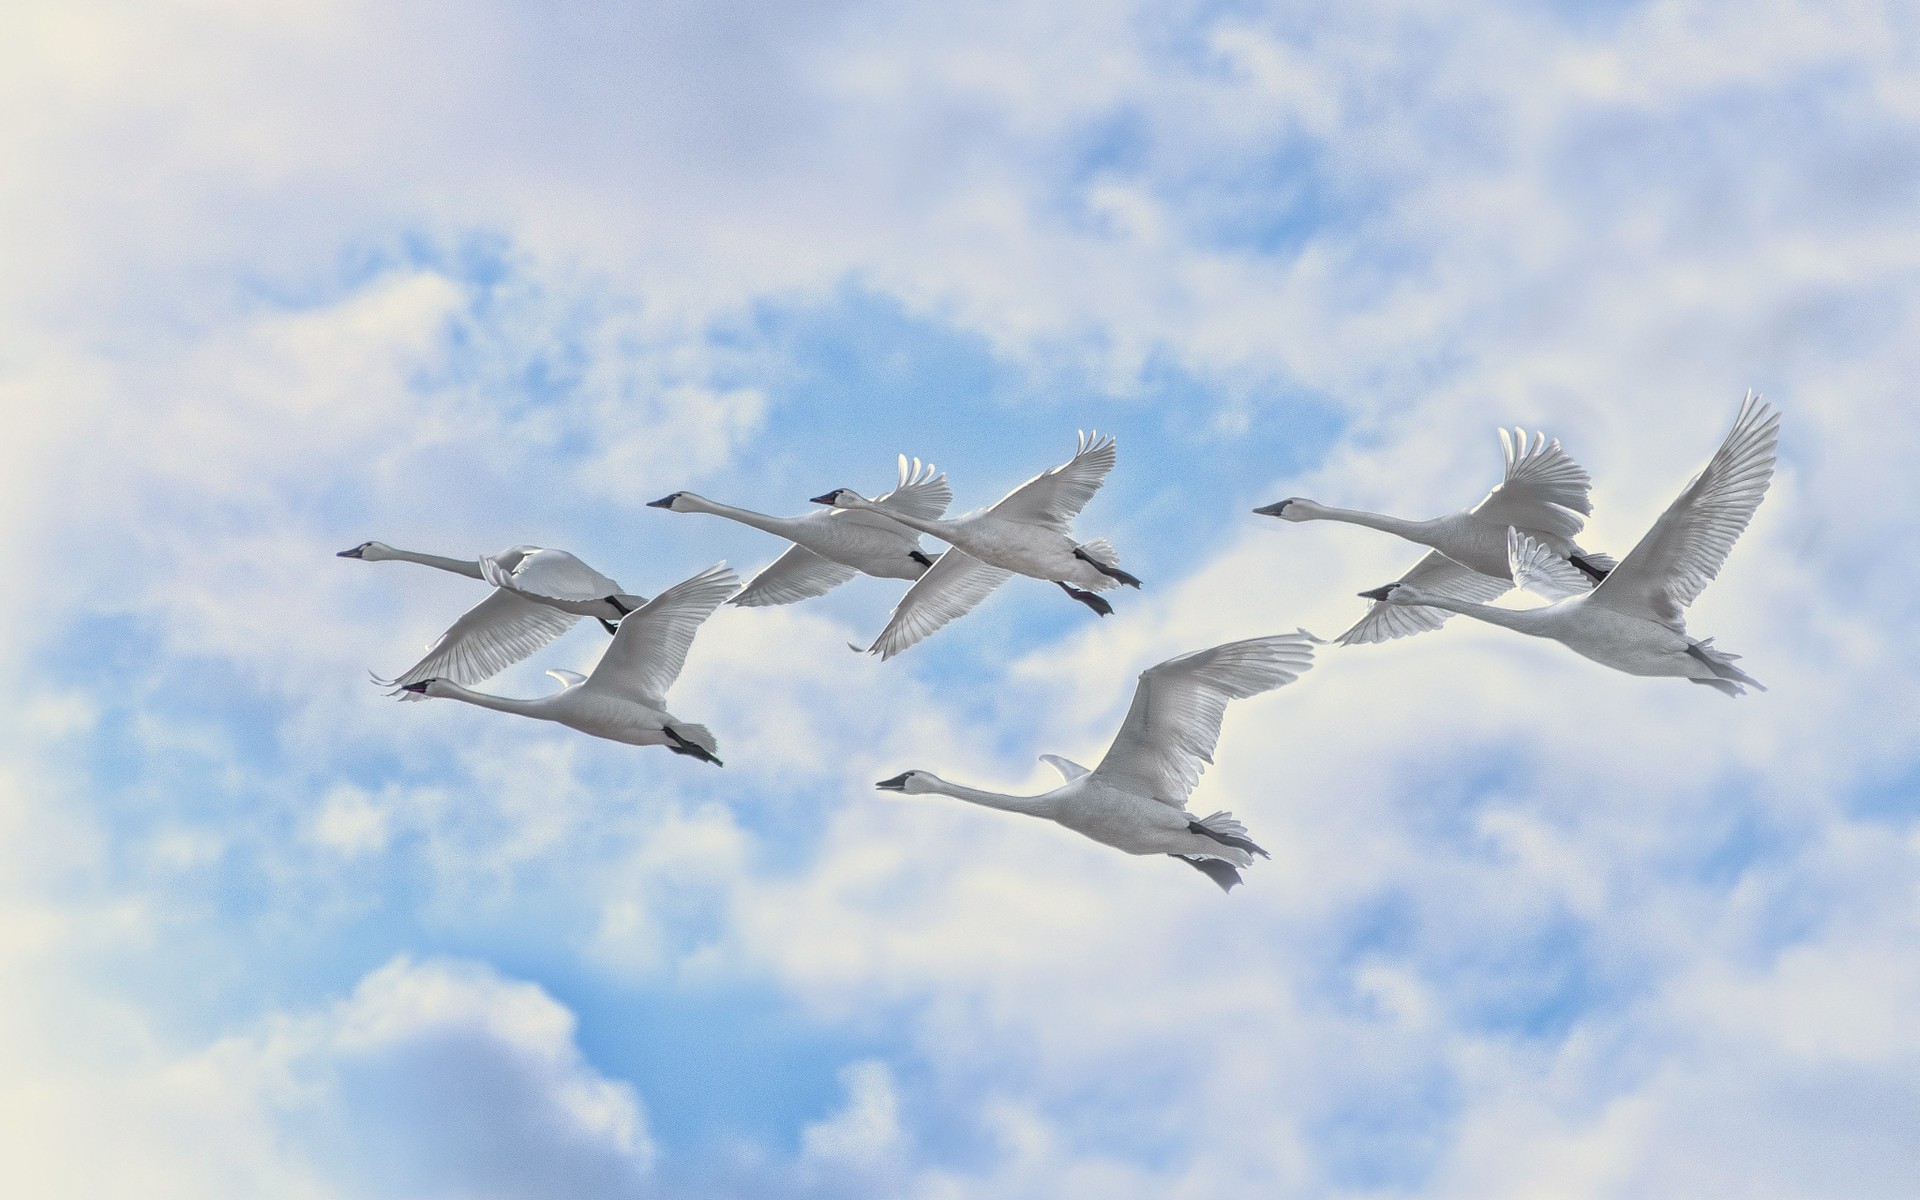 swans bird flight seagulls wildlife sky military wing outdoors air animal airplane migration goose nature aircraft fly